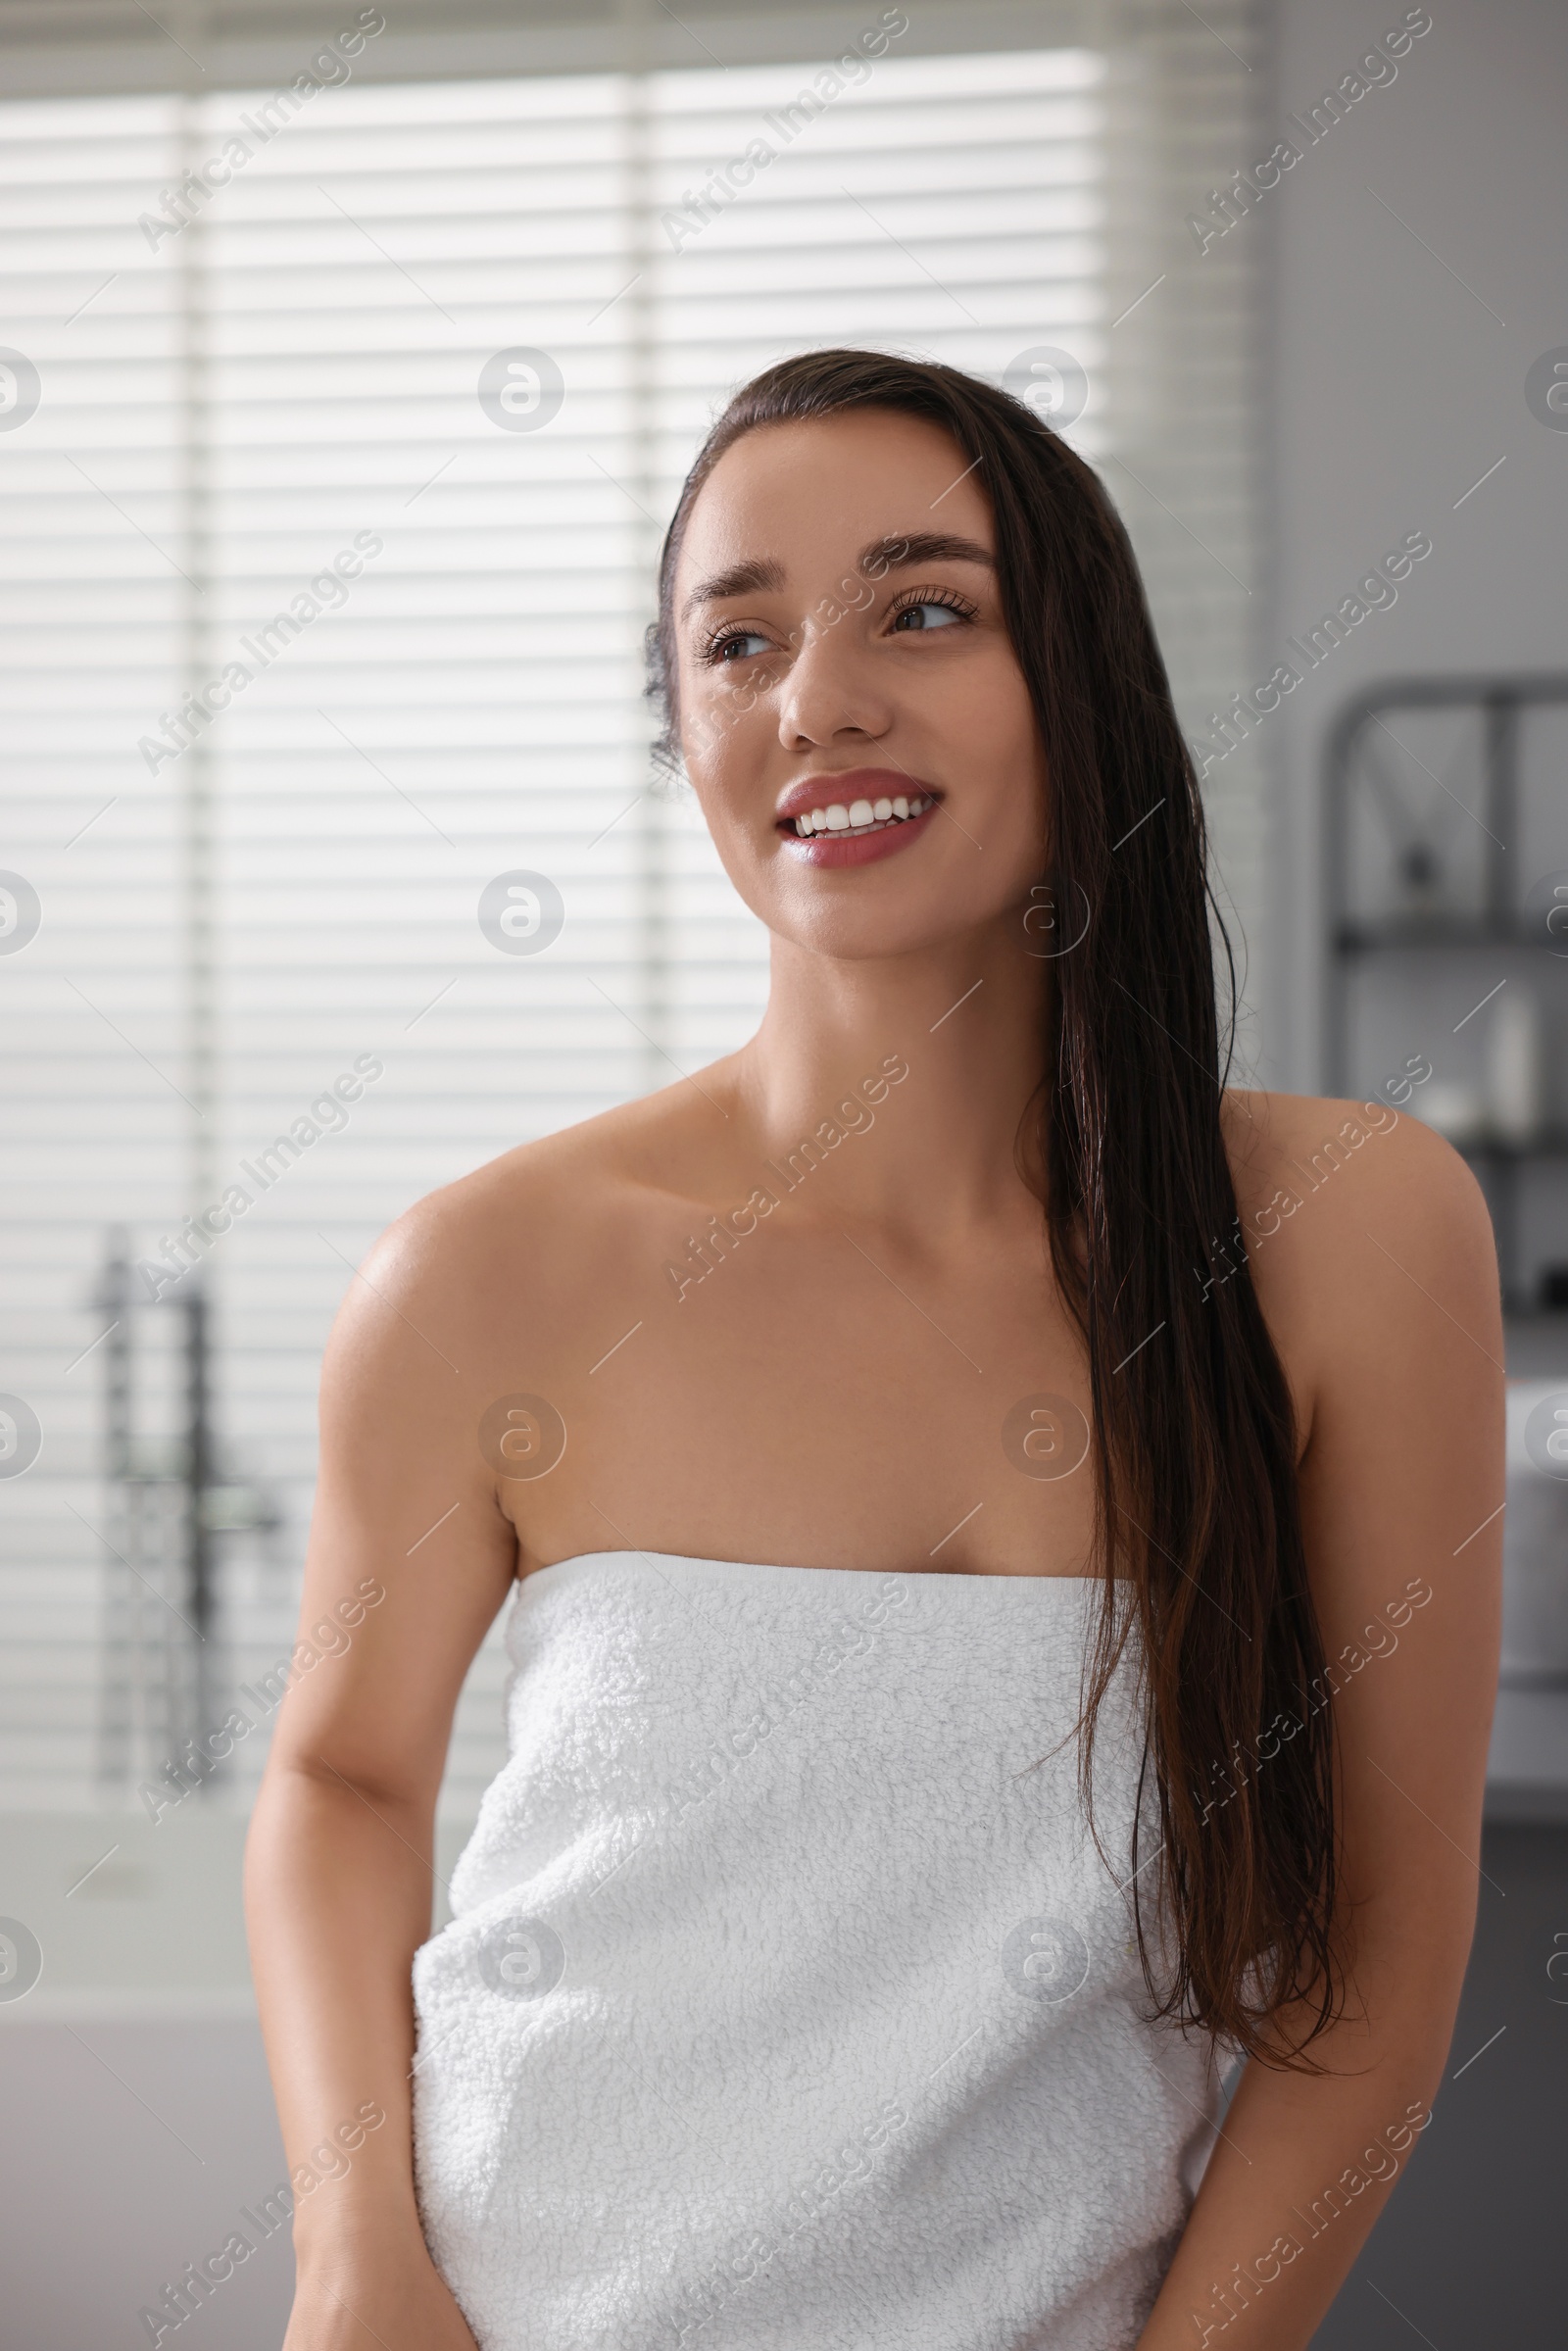 Photo of Smiling young woman after shower in bathroom